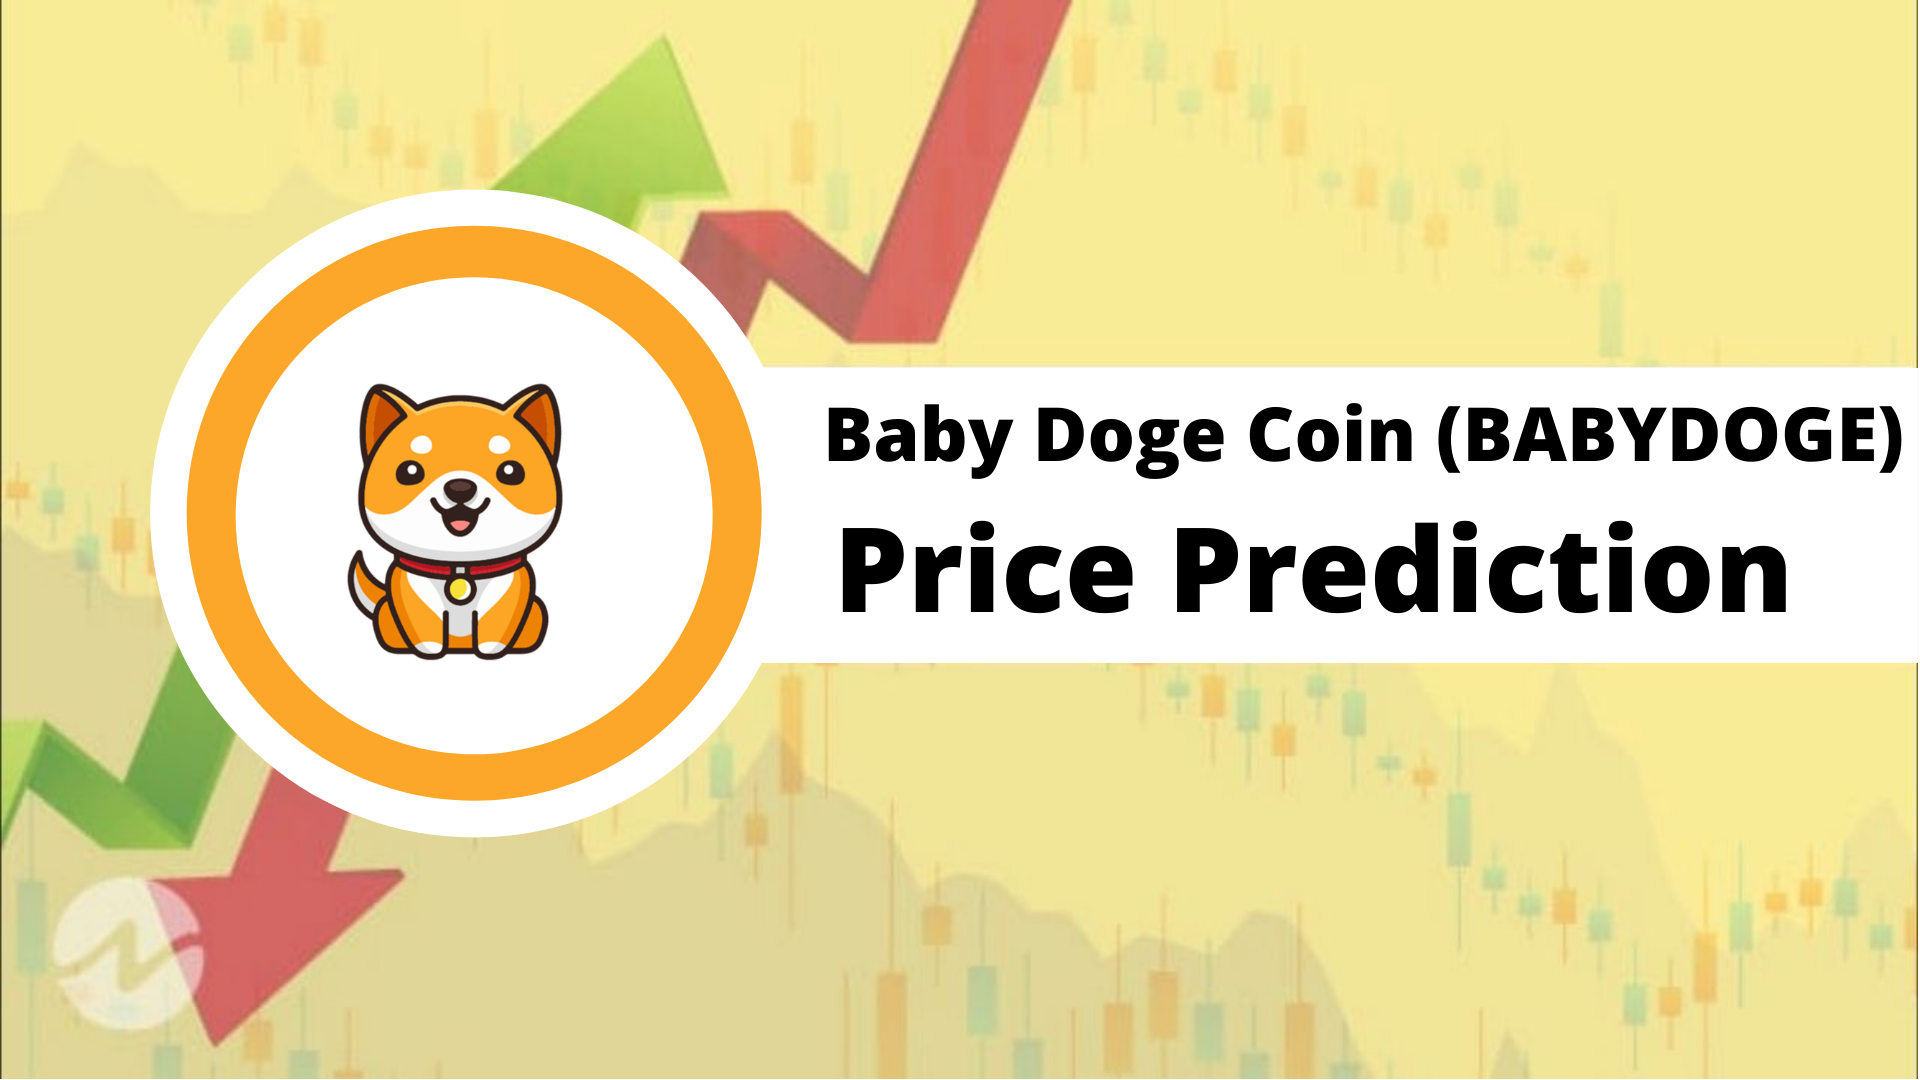 Baby DOGE coin predictions